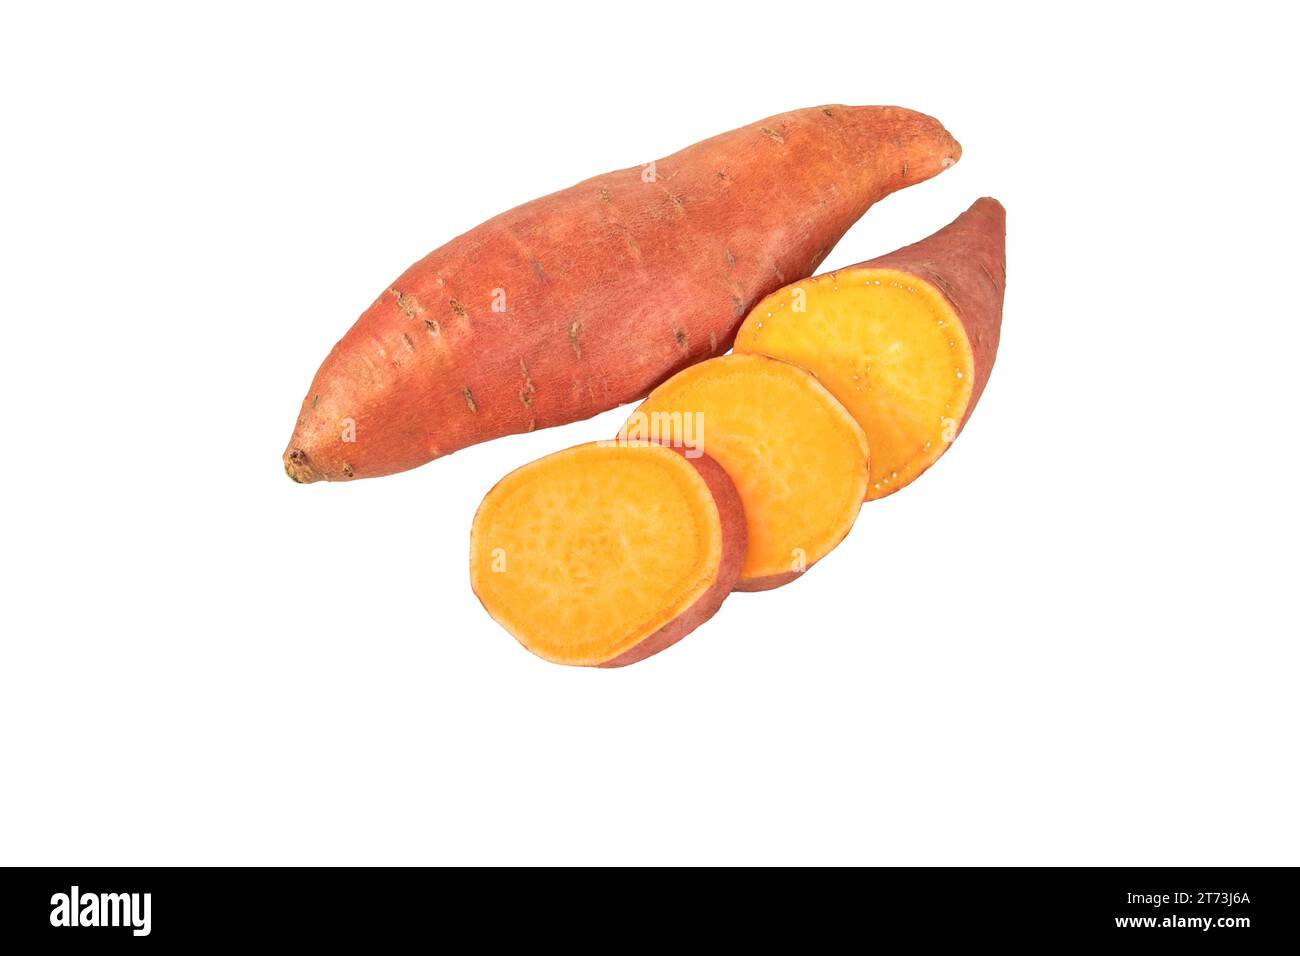 Sweet potato or sweetpotato whole and sliced tubes with red skin and yellow flesh isolated on white. Vegetable food staple. Stock Photo